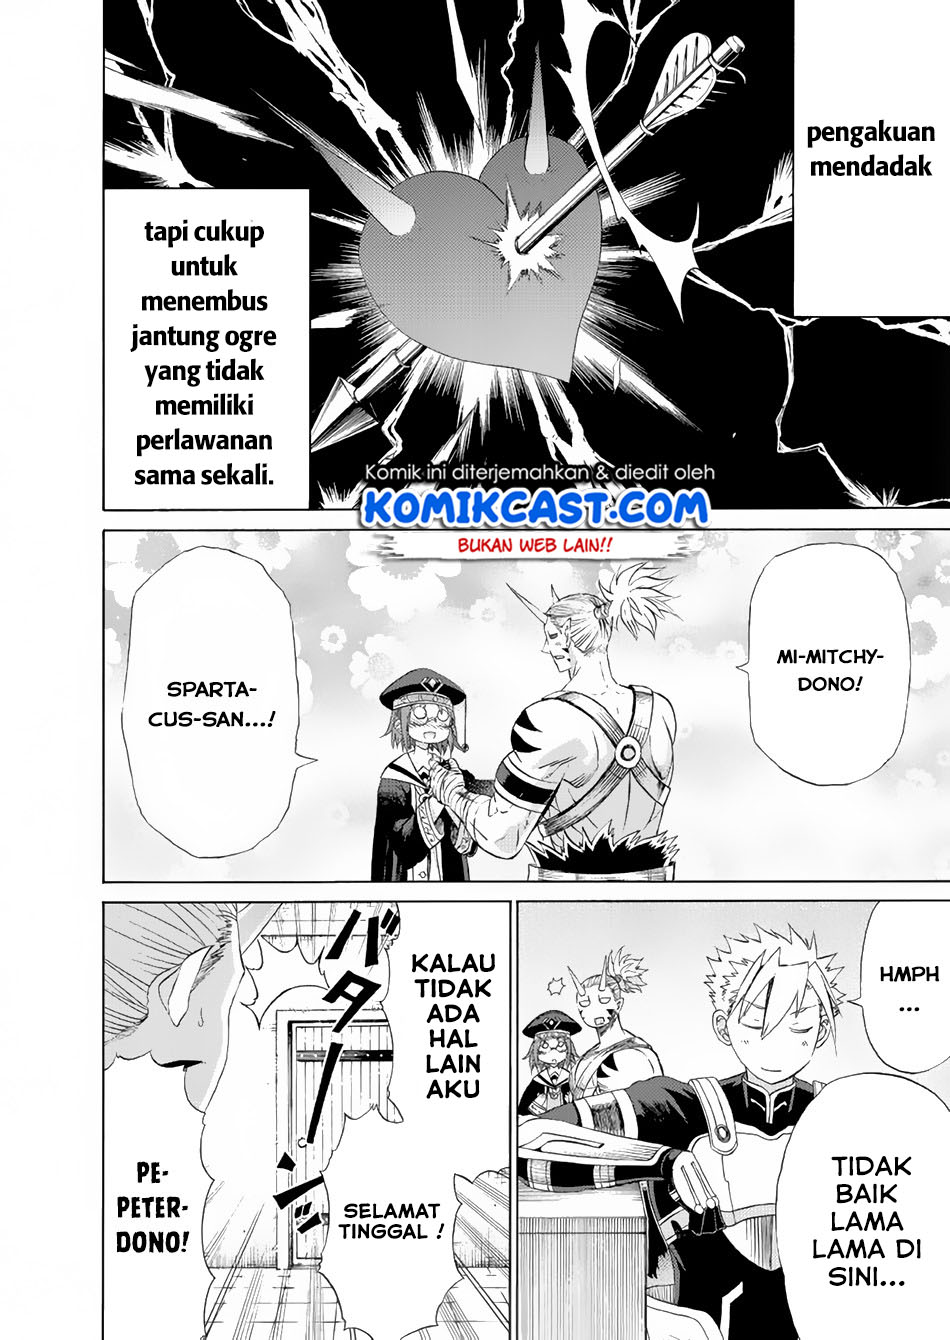 Peter Grill to Kenja no Jikan Chapter 15